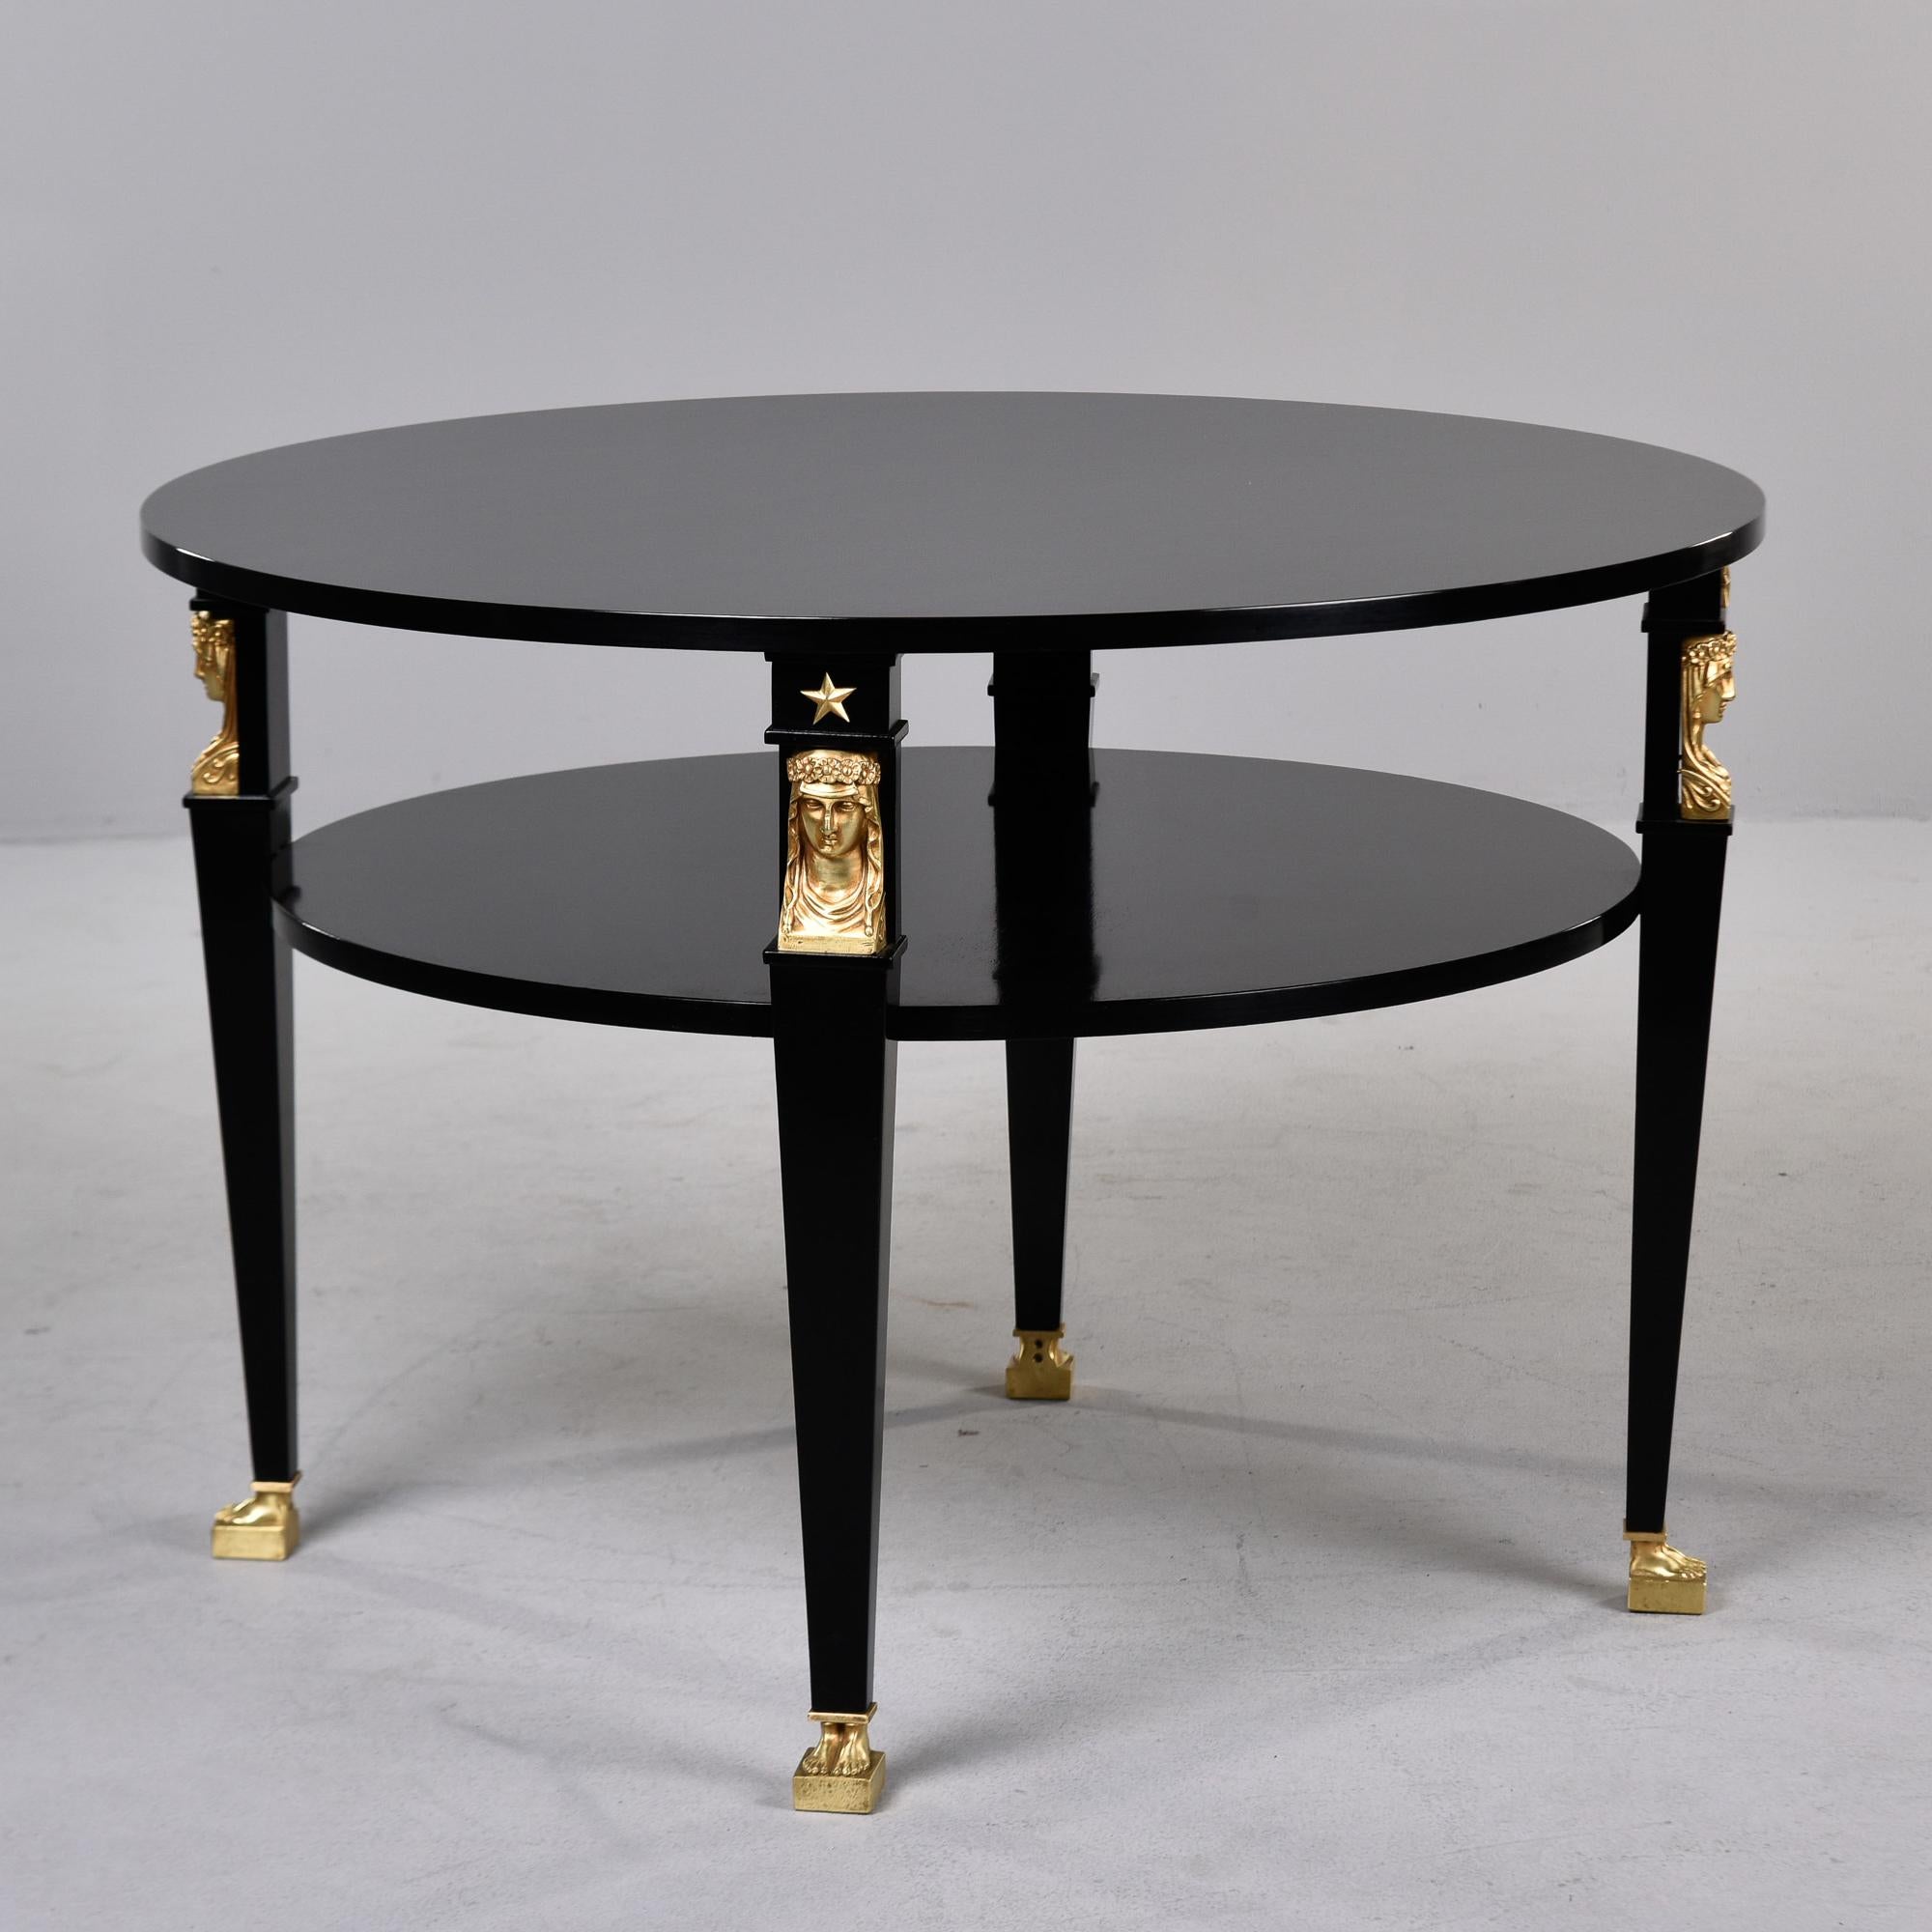 19th Century 19th C Empire Ebonised Round Table with Brass Figural Mounts For Sale